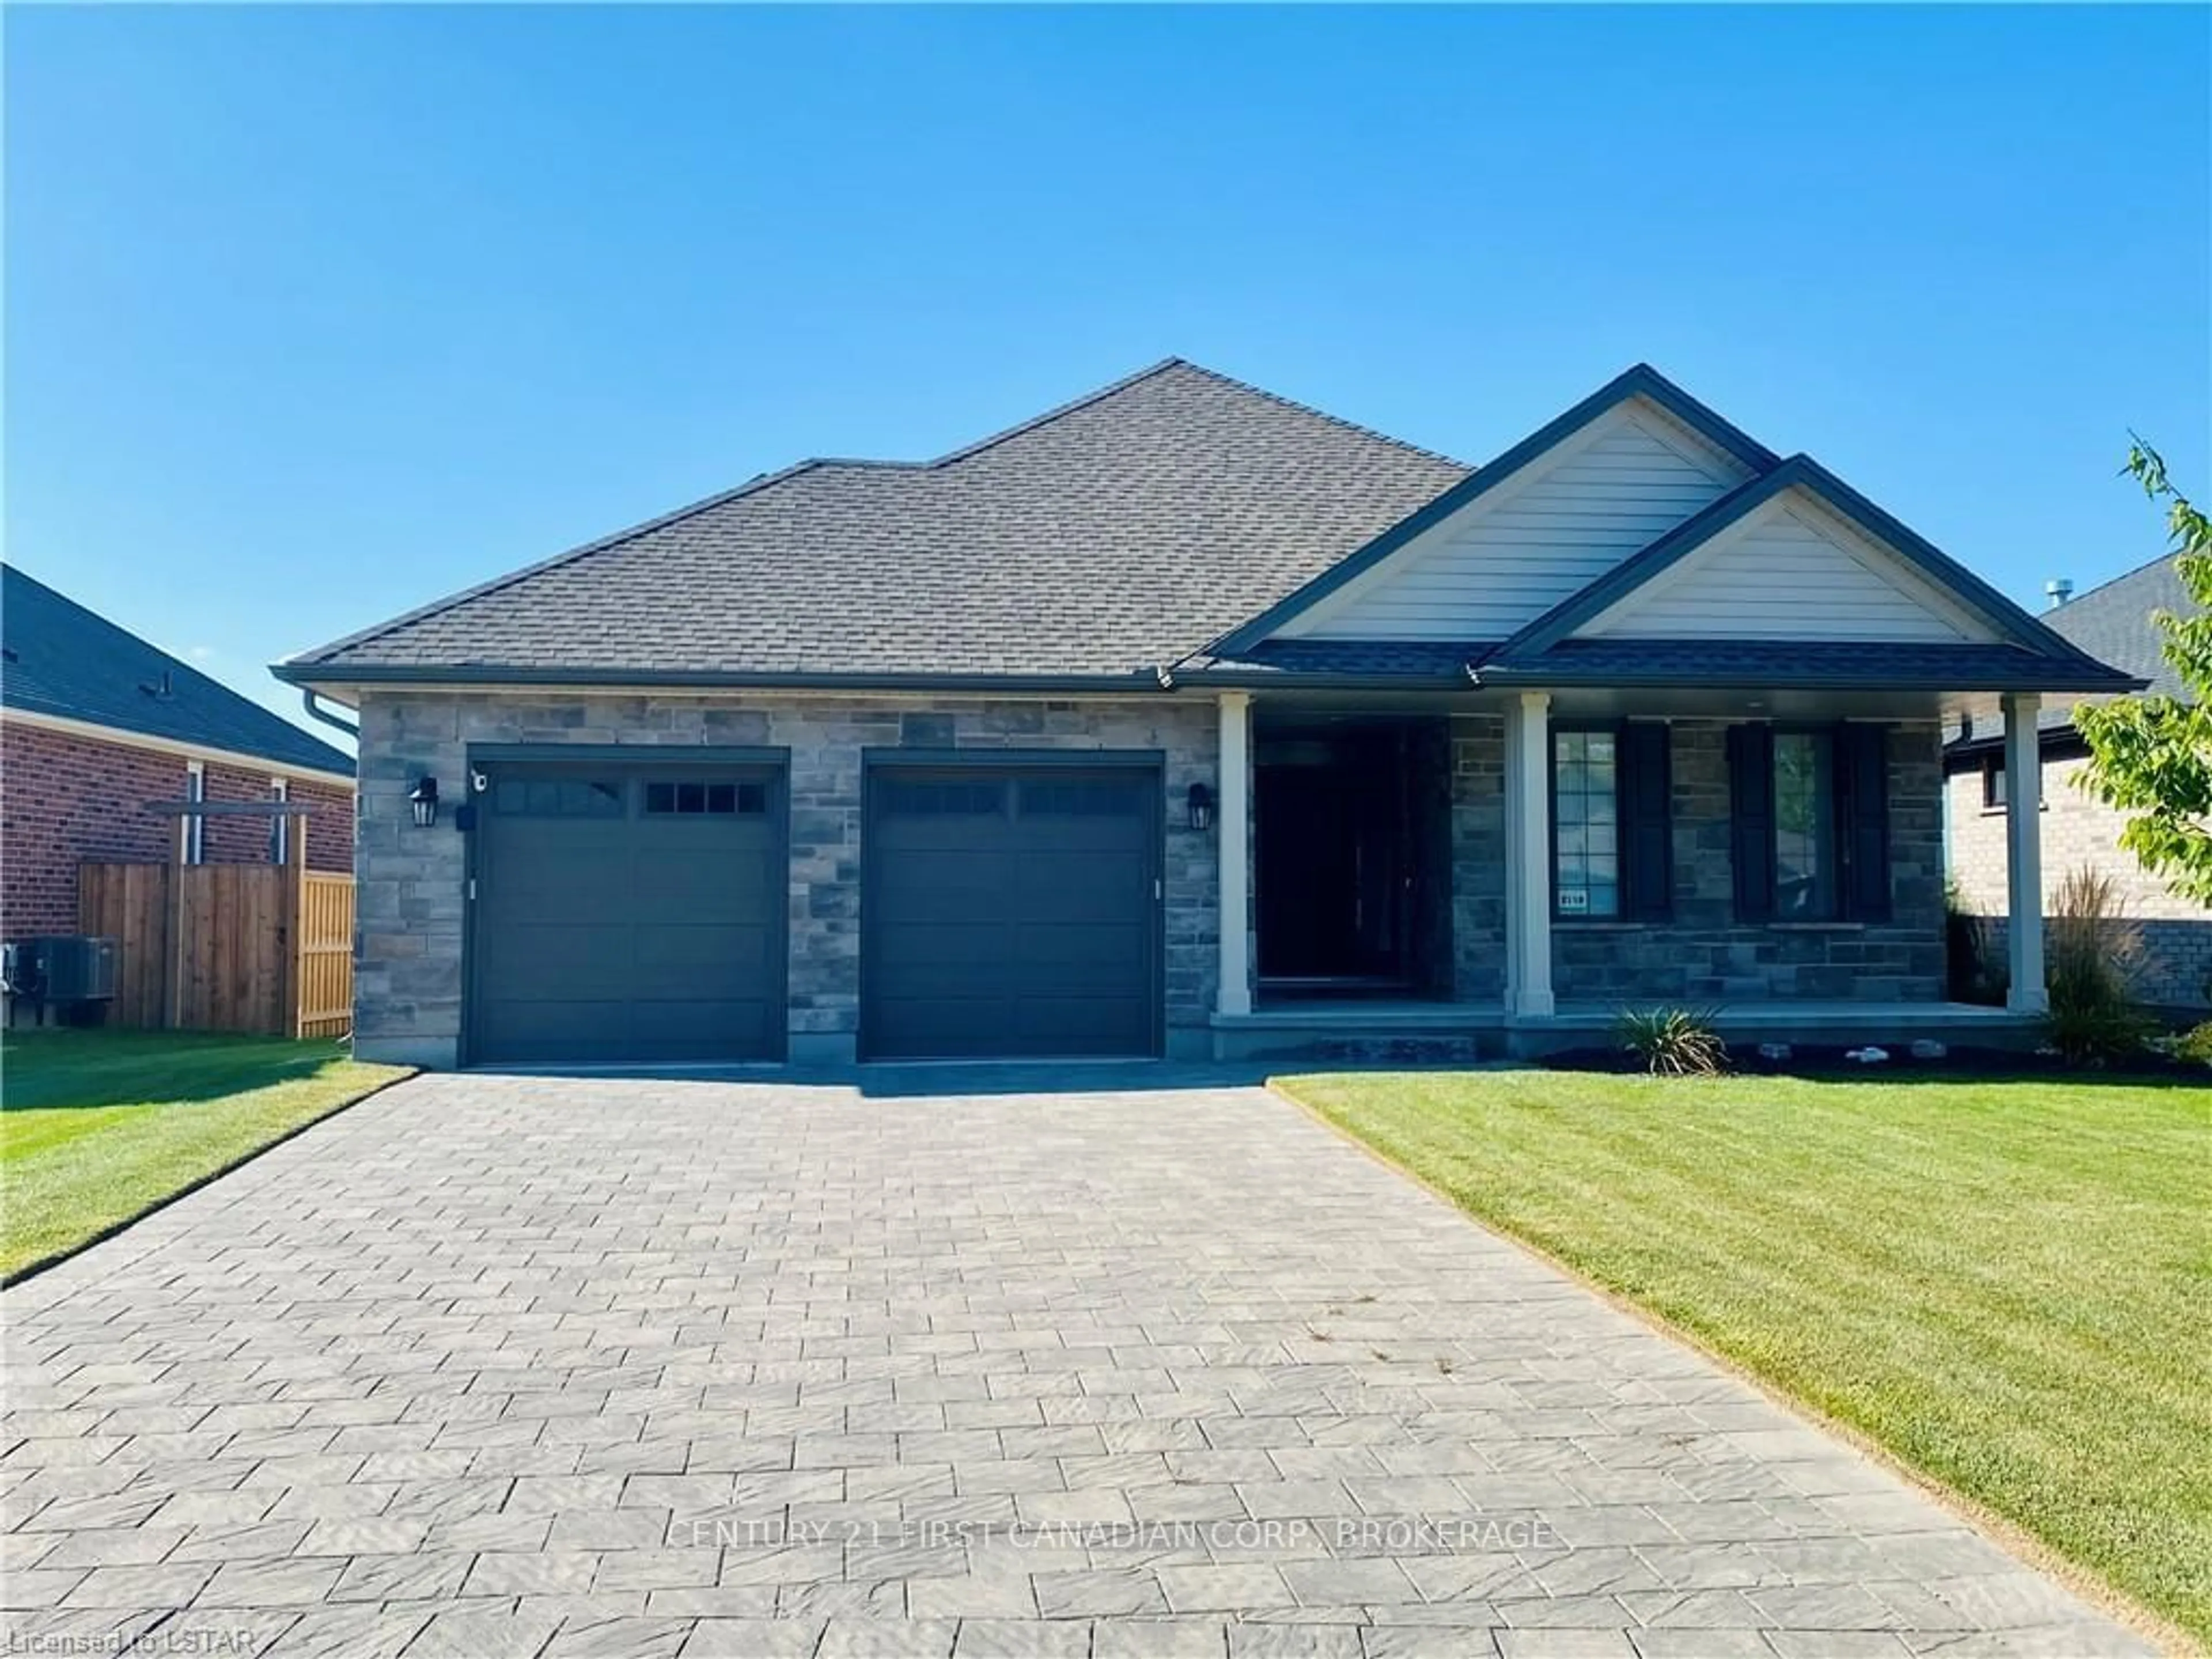 Home with brick exterior material for 2118 Lockwood Cres, Strathroy-Caradoc Ontario N0L 1W0